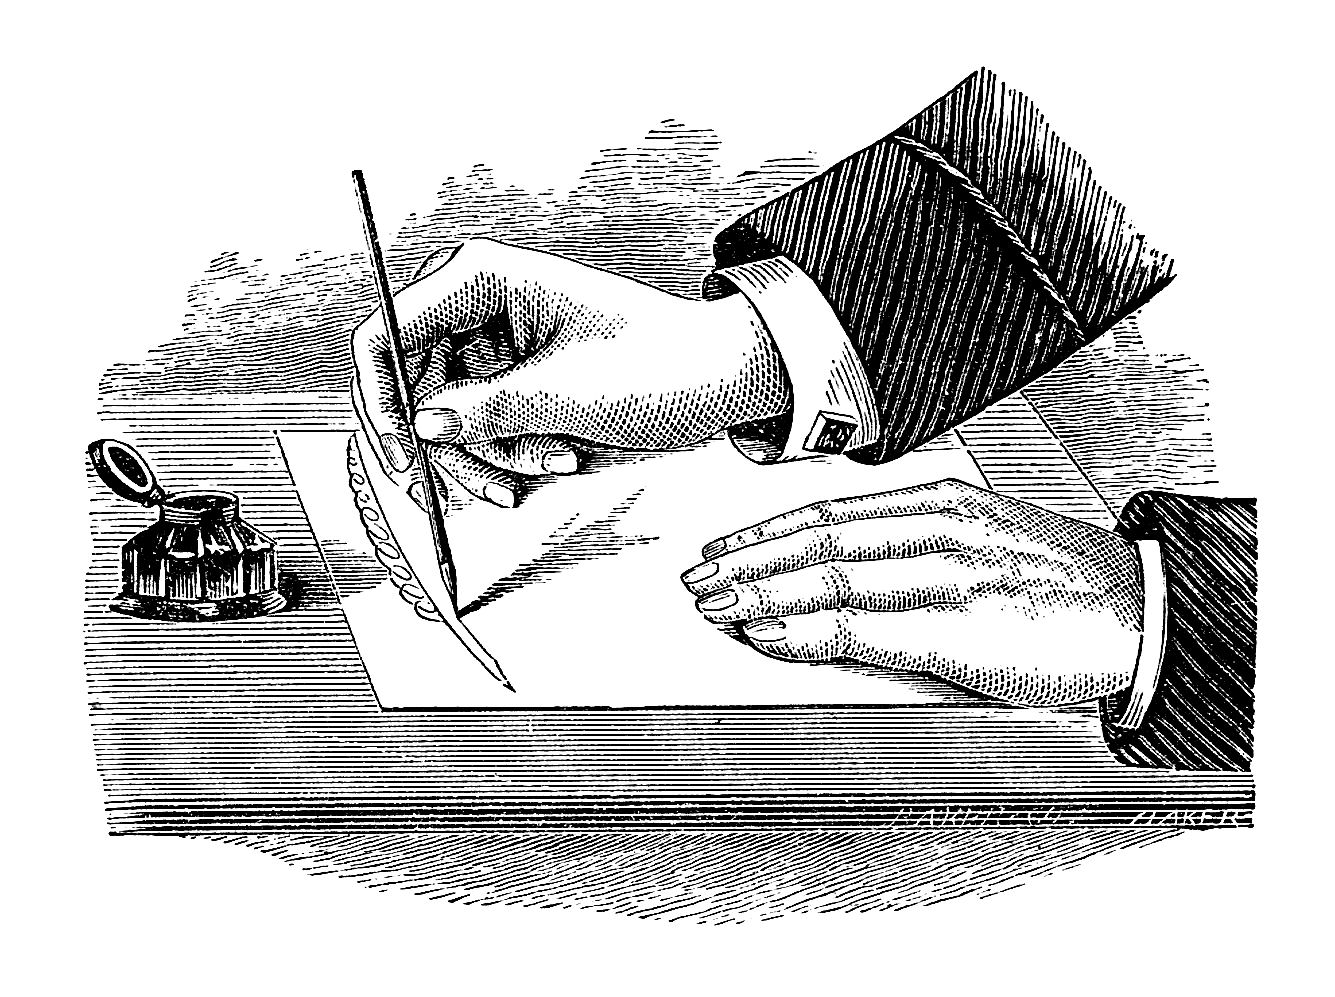 Here S A Wonderful Black And White Illustration Of Hands Writing A